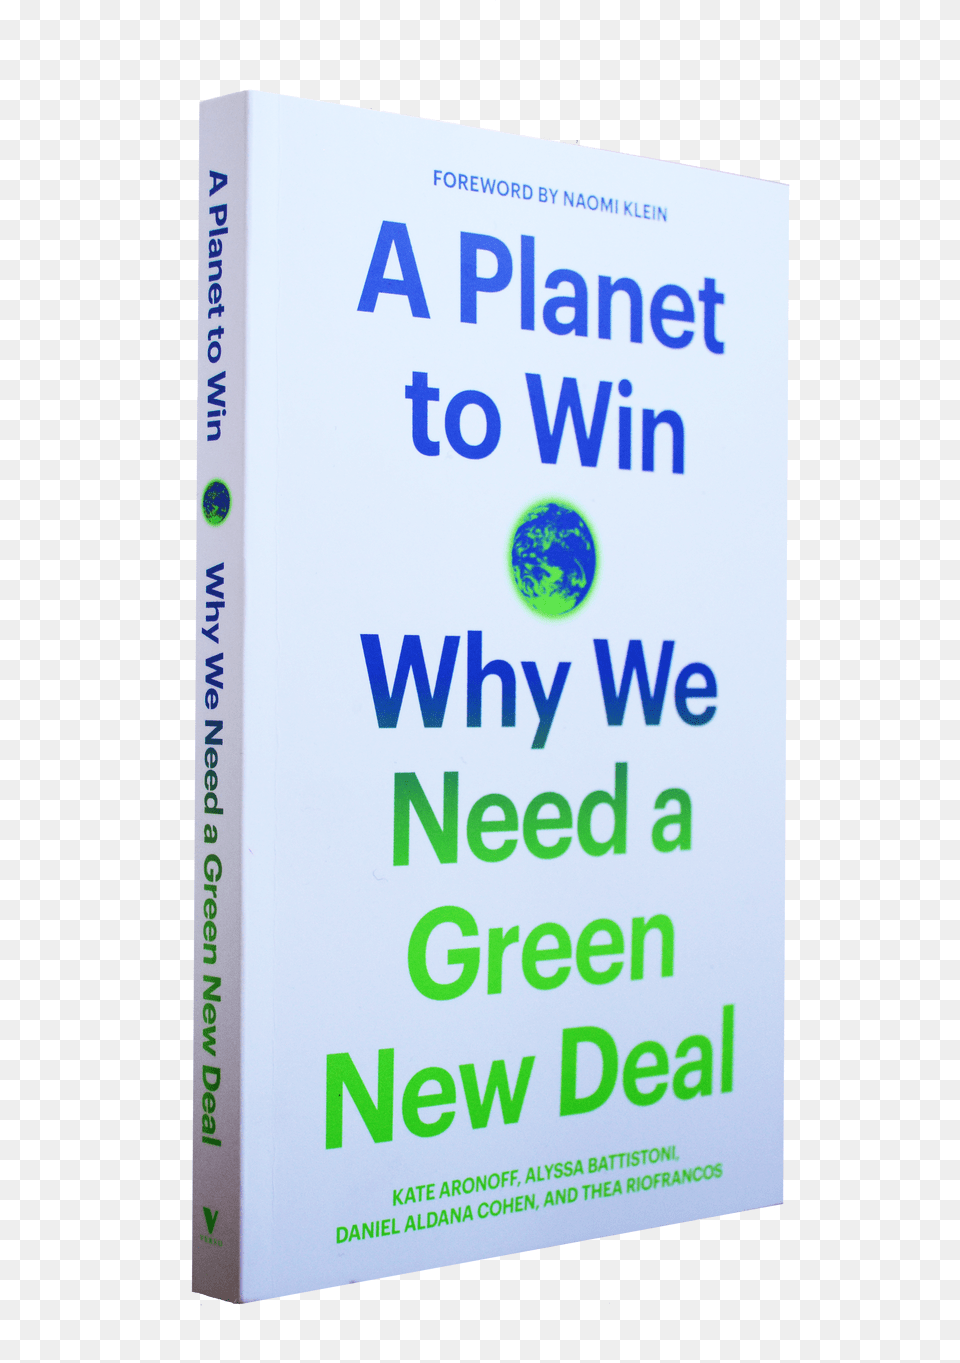 Planetwin Planet To Win Why We Need A Green New De, Book, Publication, Art, Graphics Png Image